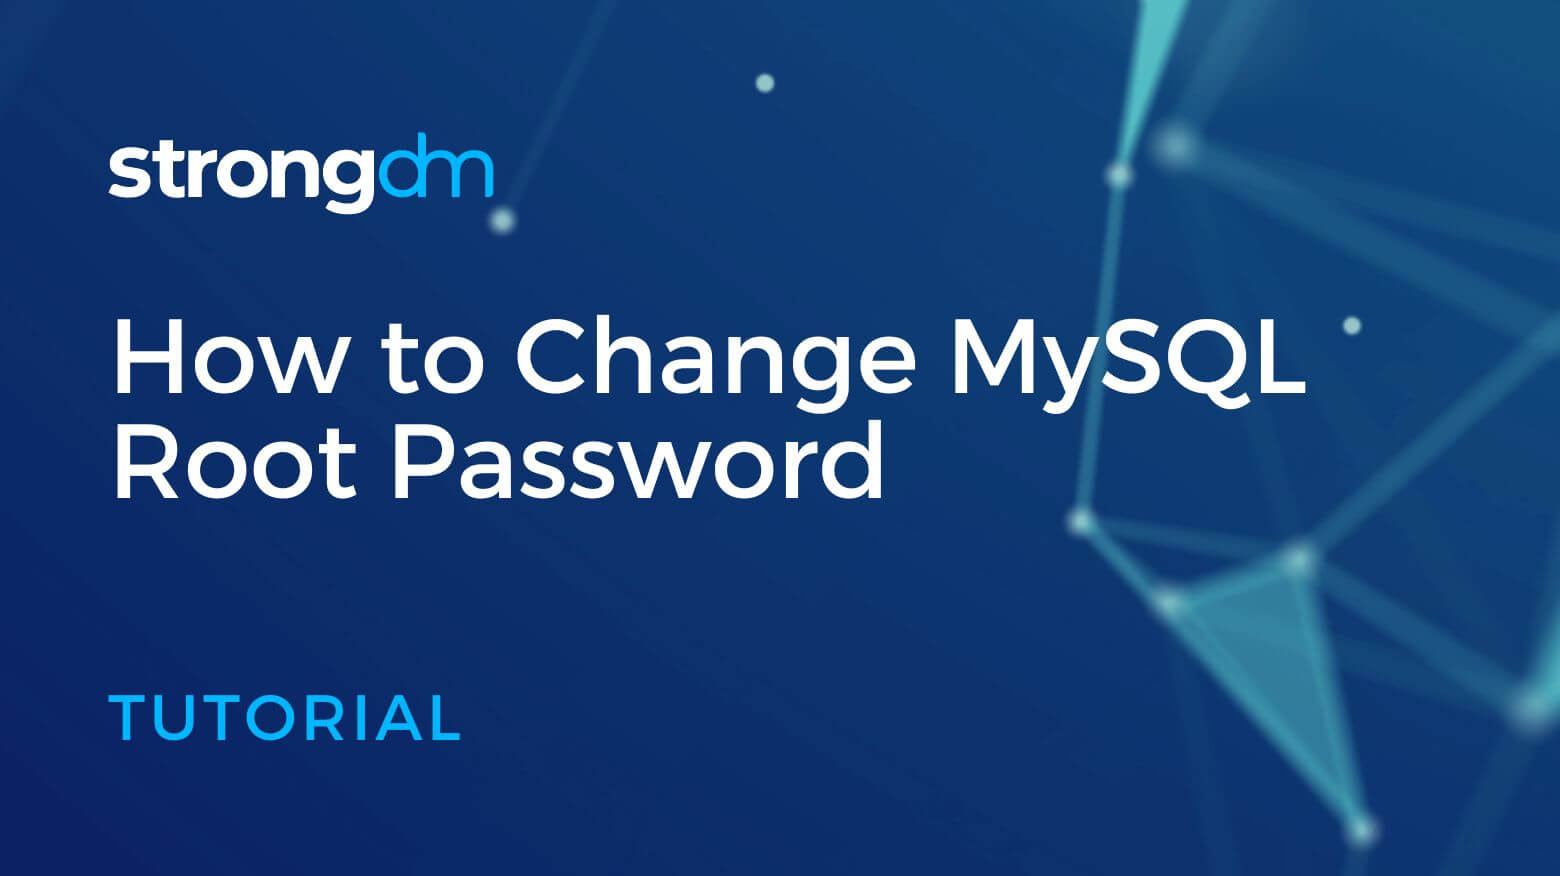 Change MySQL Root Password in Linux or Windows Step-By-Step